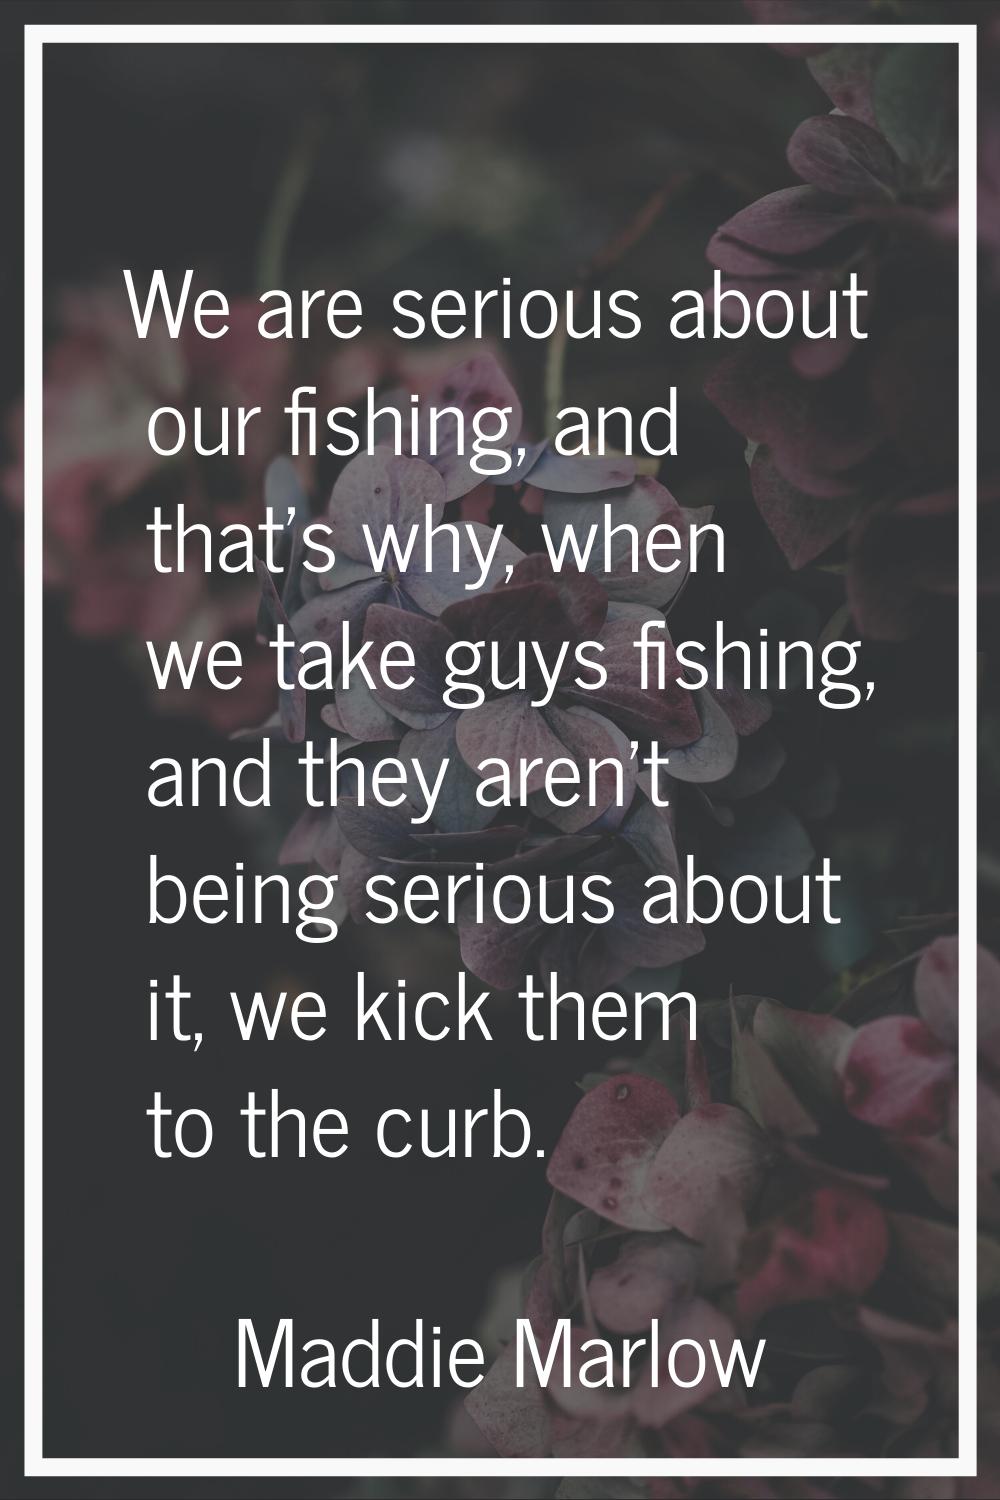 We are serious about our fishing, and that's why, when we take guys fishing, and they aren't being 